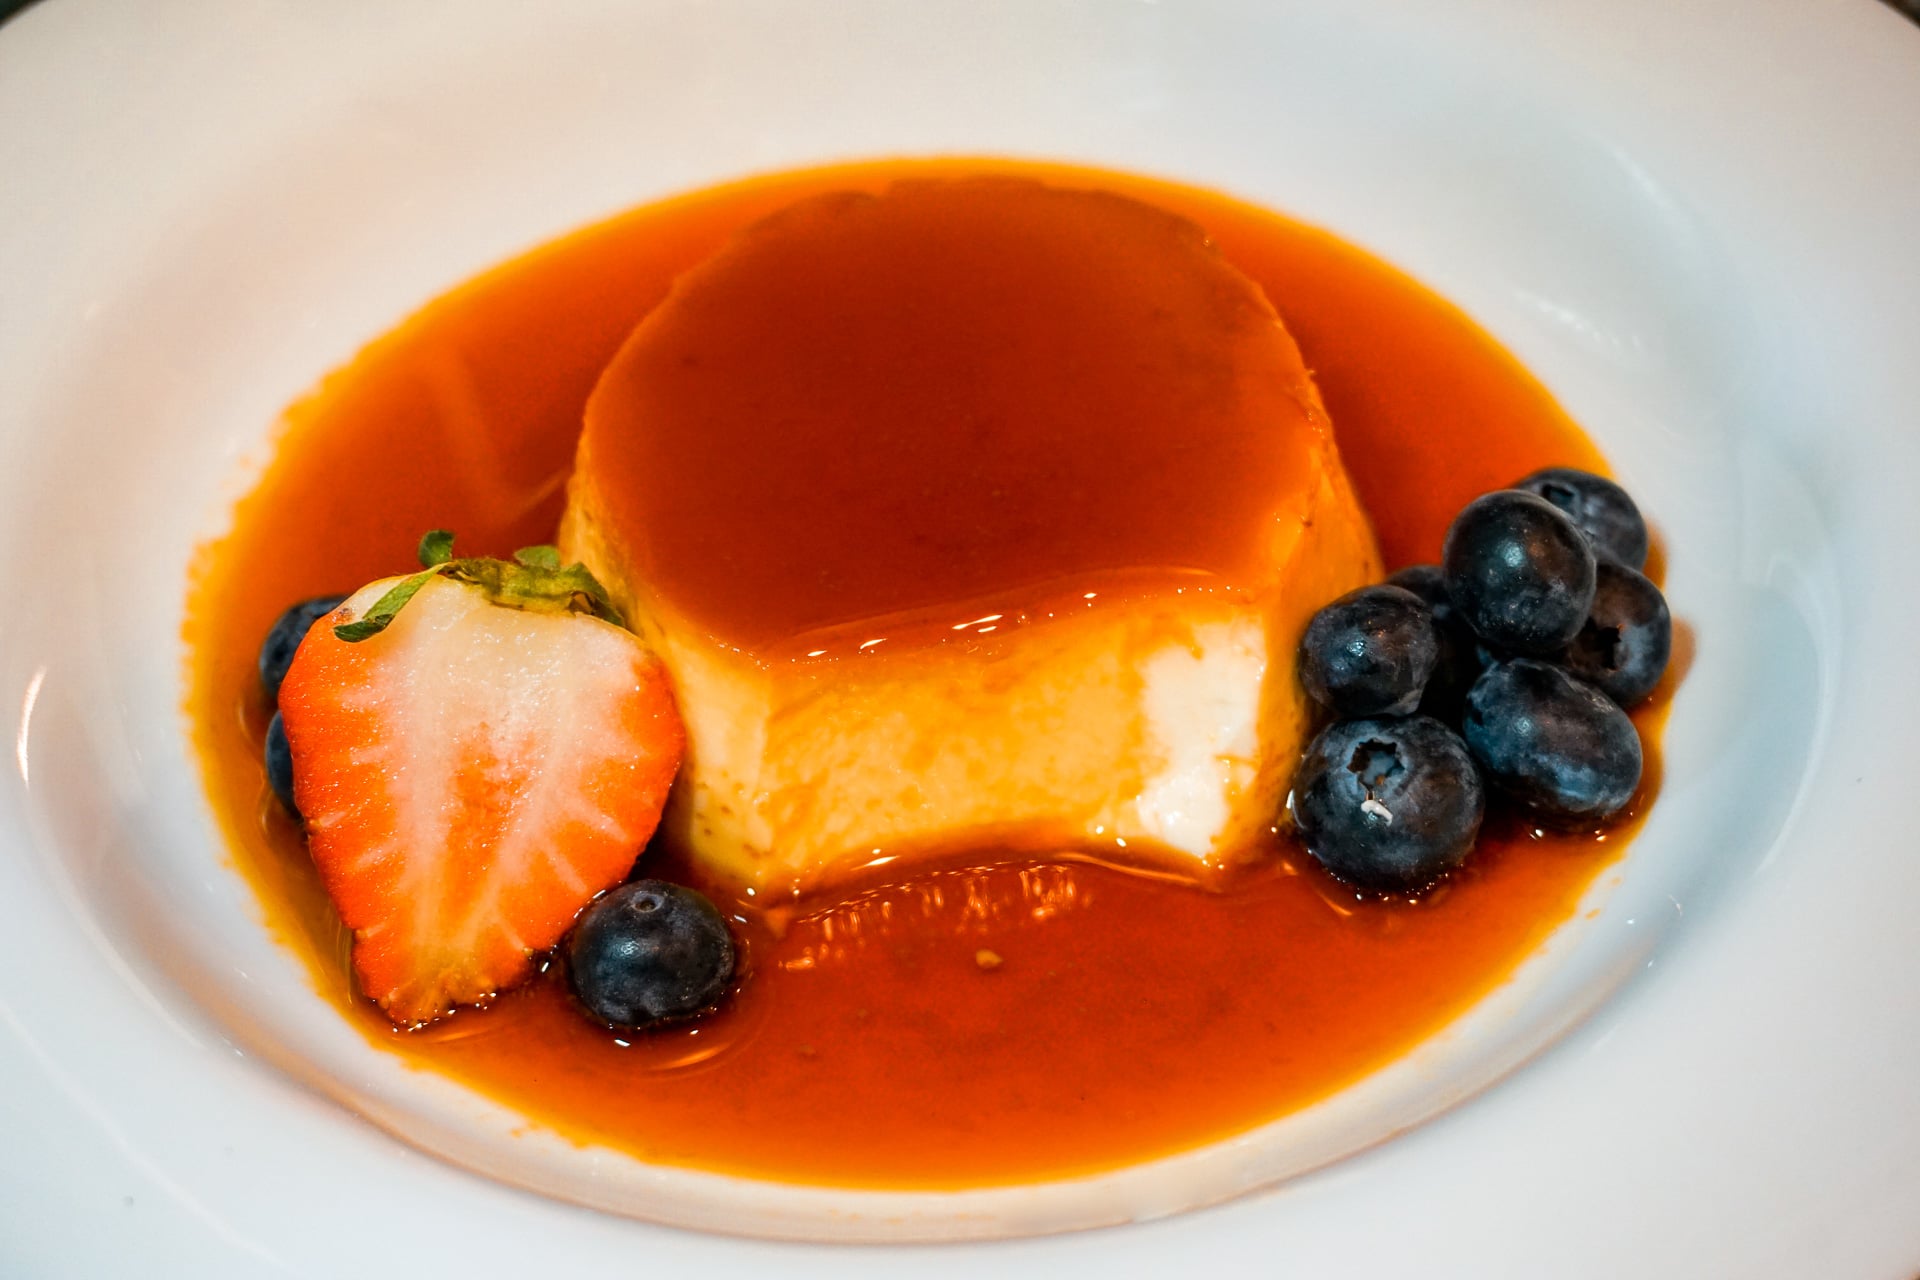 https://www.oursweetadventures.com/wp-content/uploads/2020/04/Flan-with-Berries-2.jpg